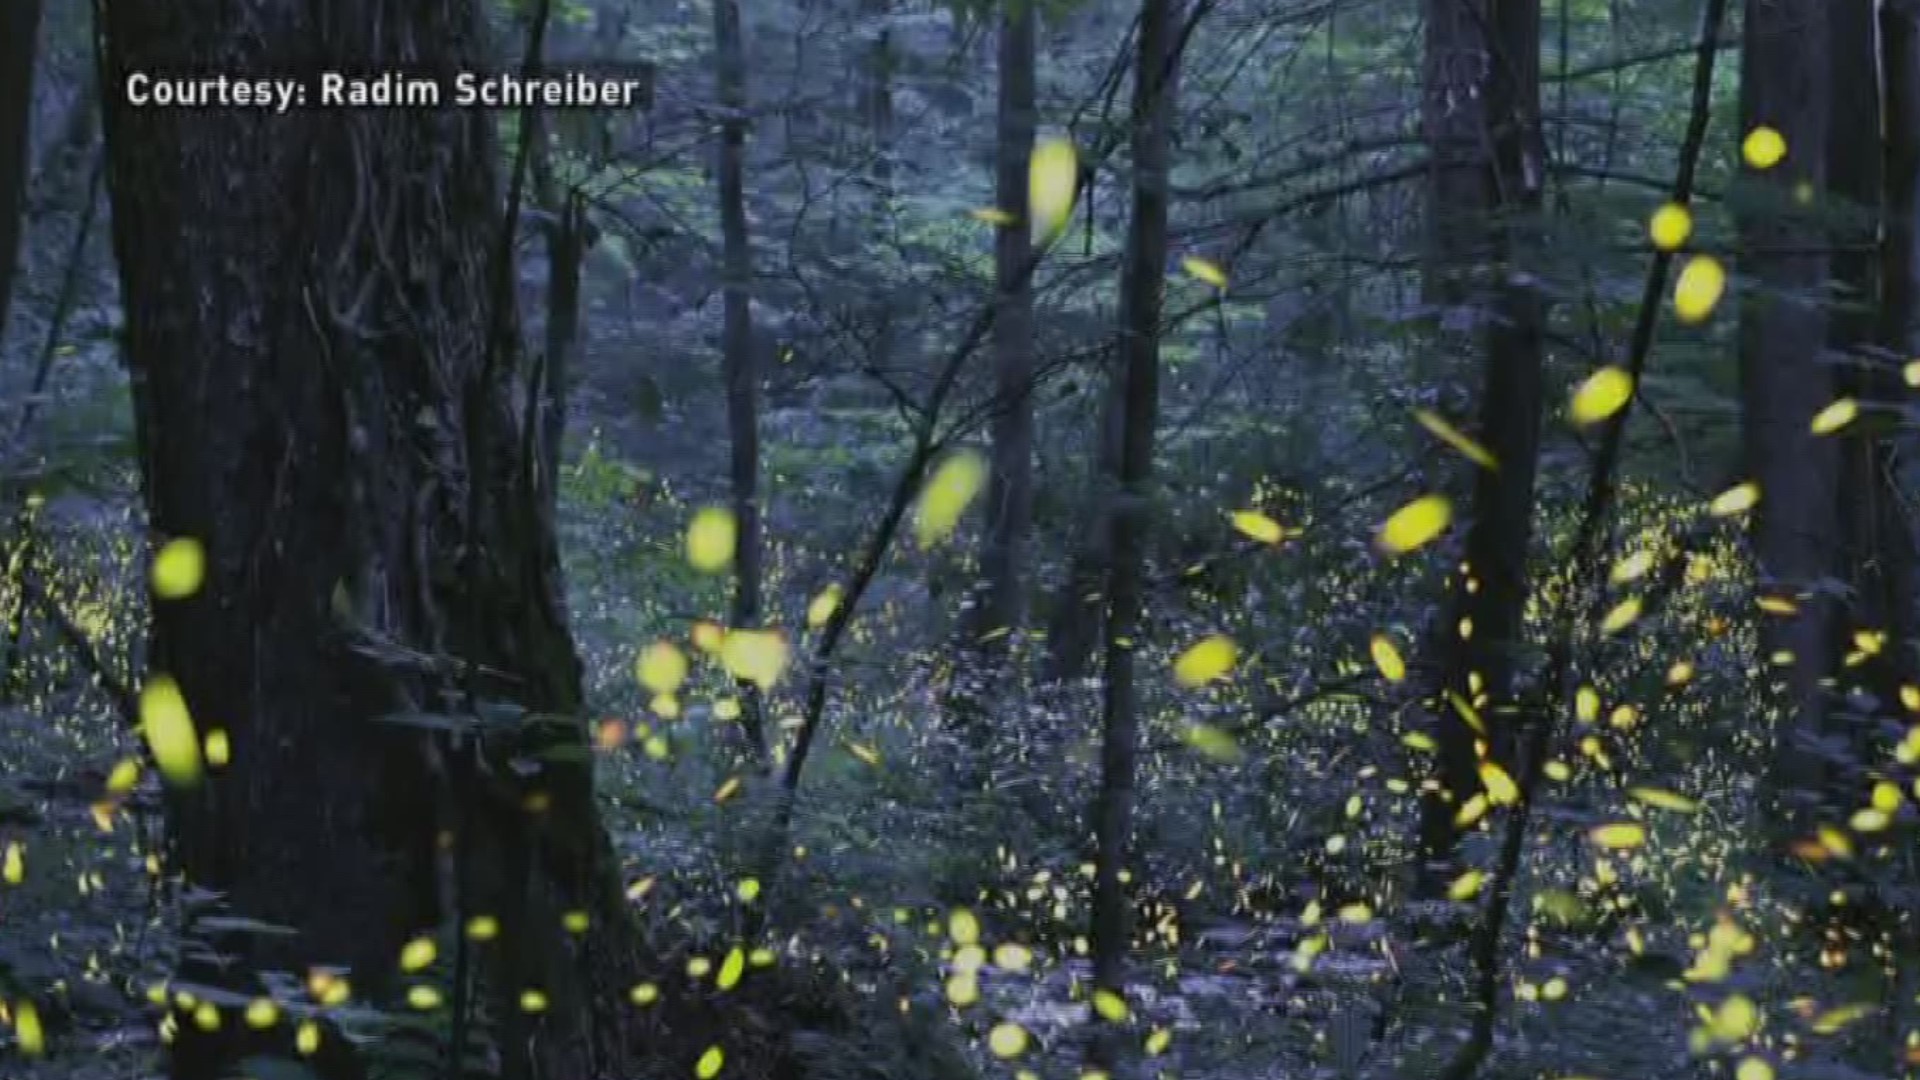 10News reporter Michael Crowe has more on the annual synchronous firefly event in the Great Smoky Mountain National Park. (6/1/16)